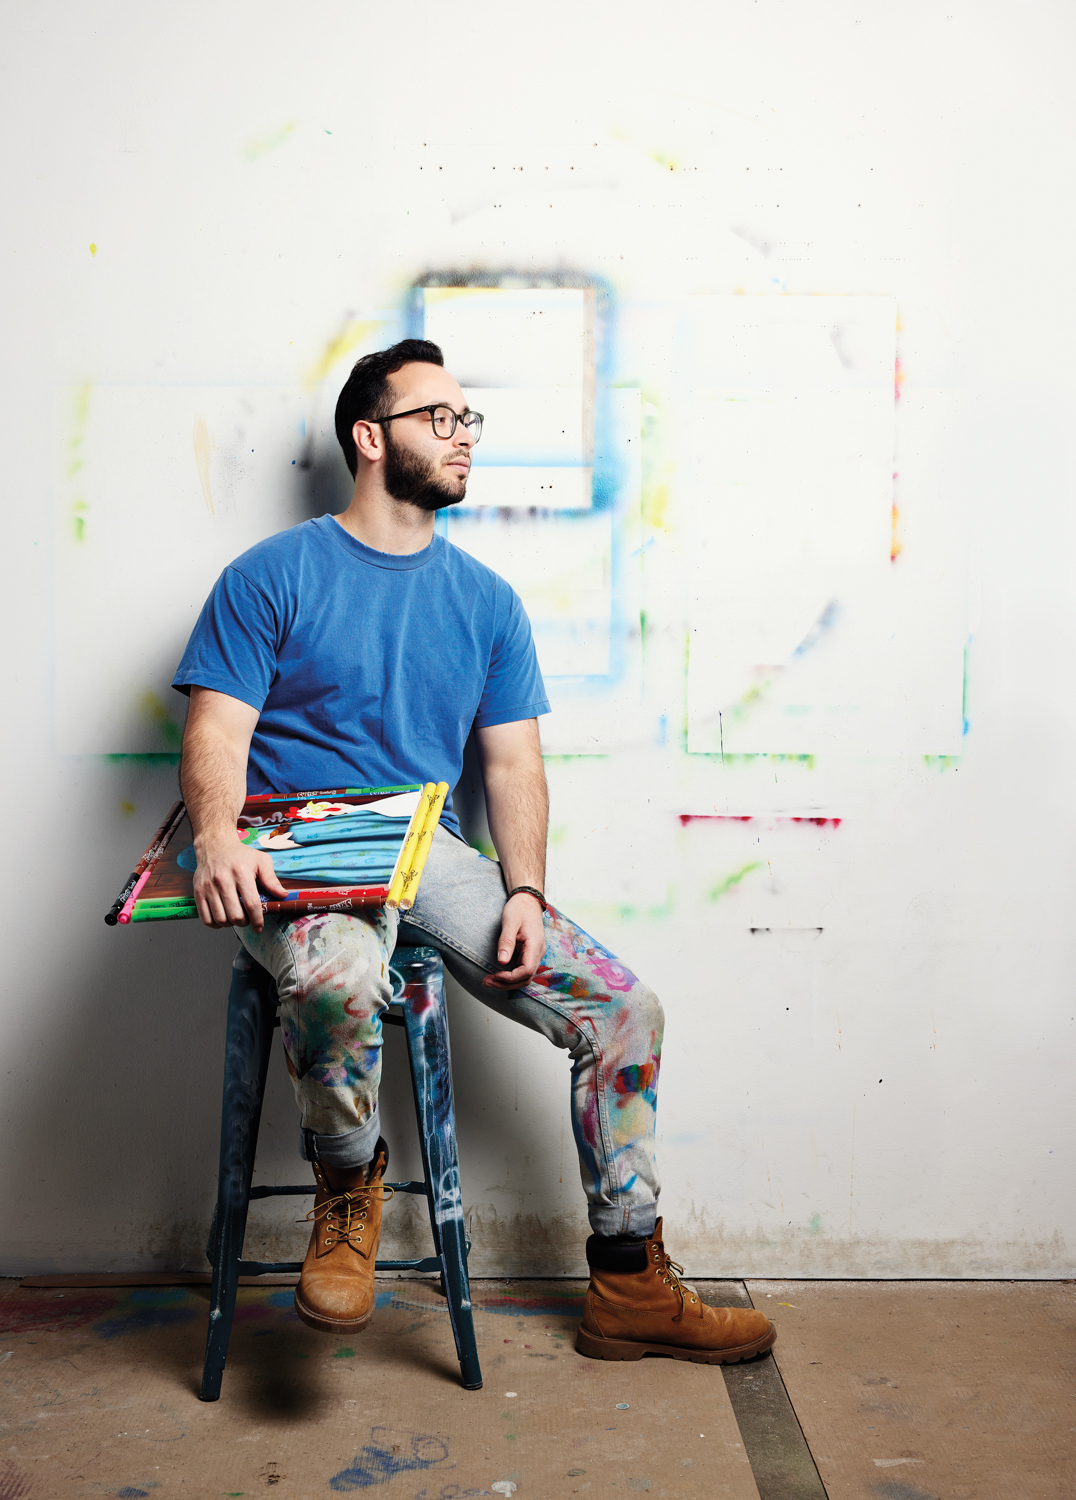 Griffin Goodman in blue t-shirt sitting on a stool holding a painting